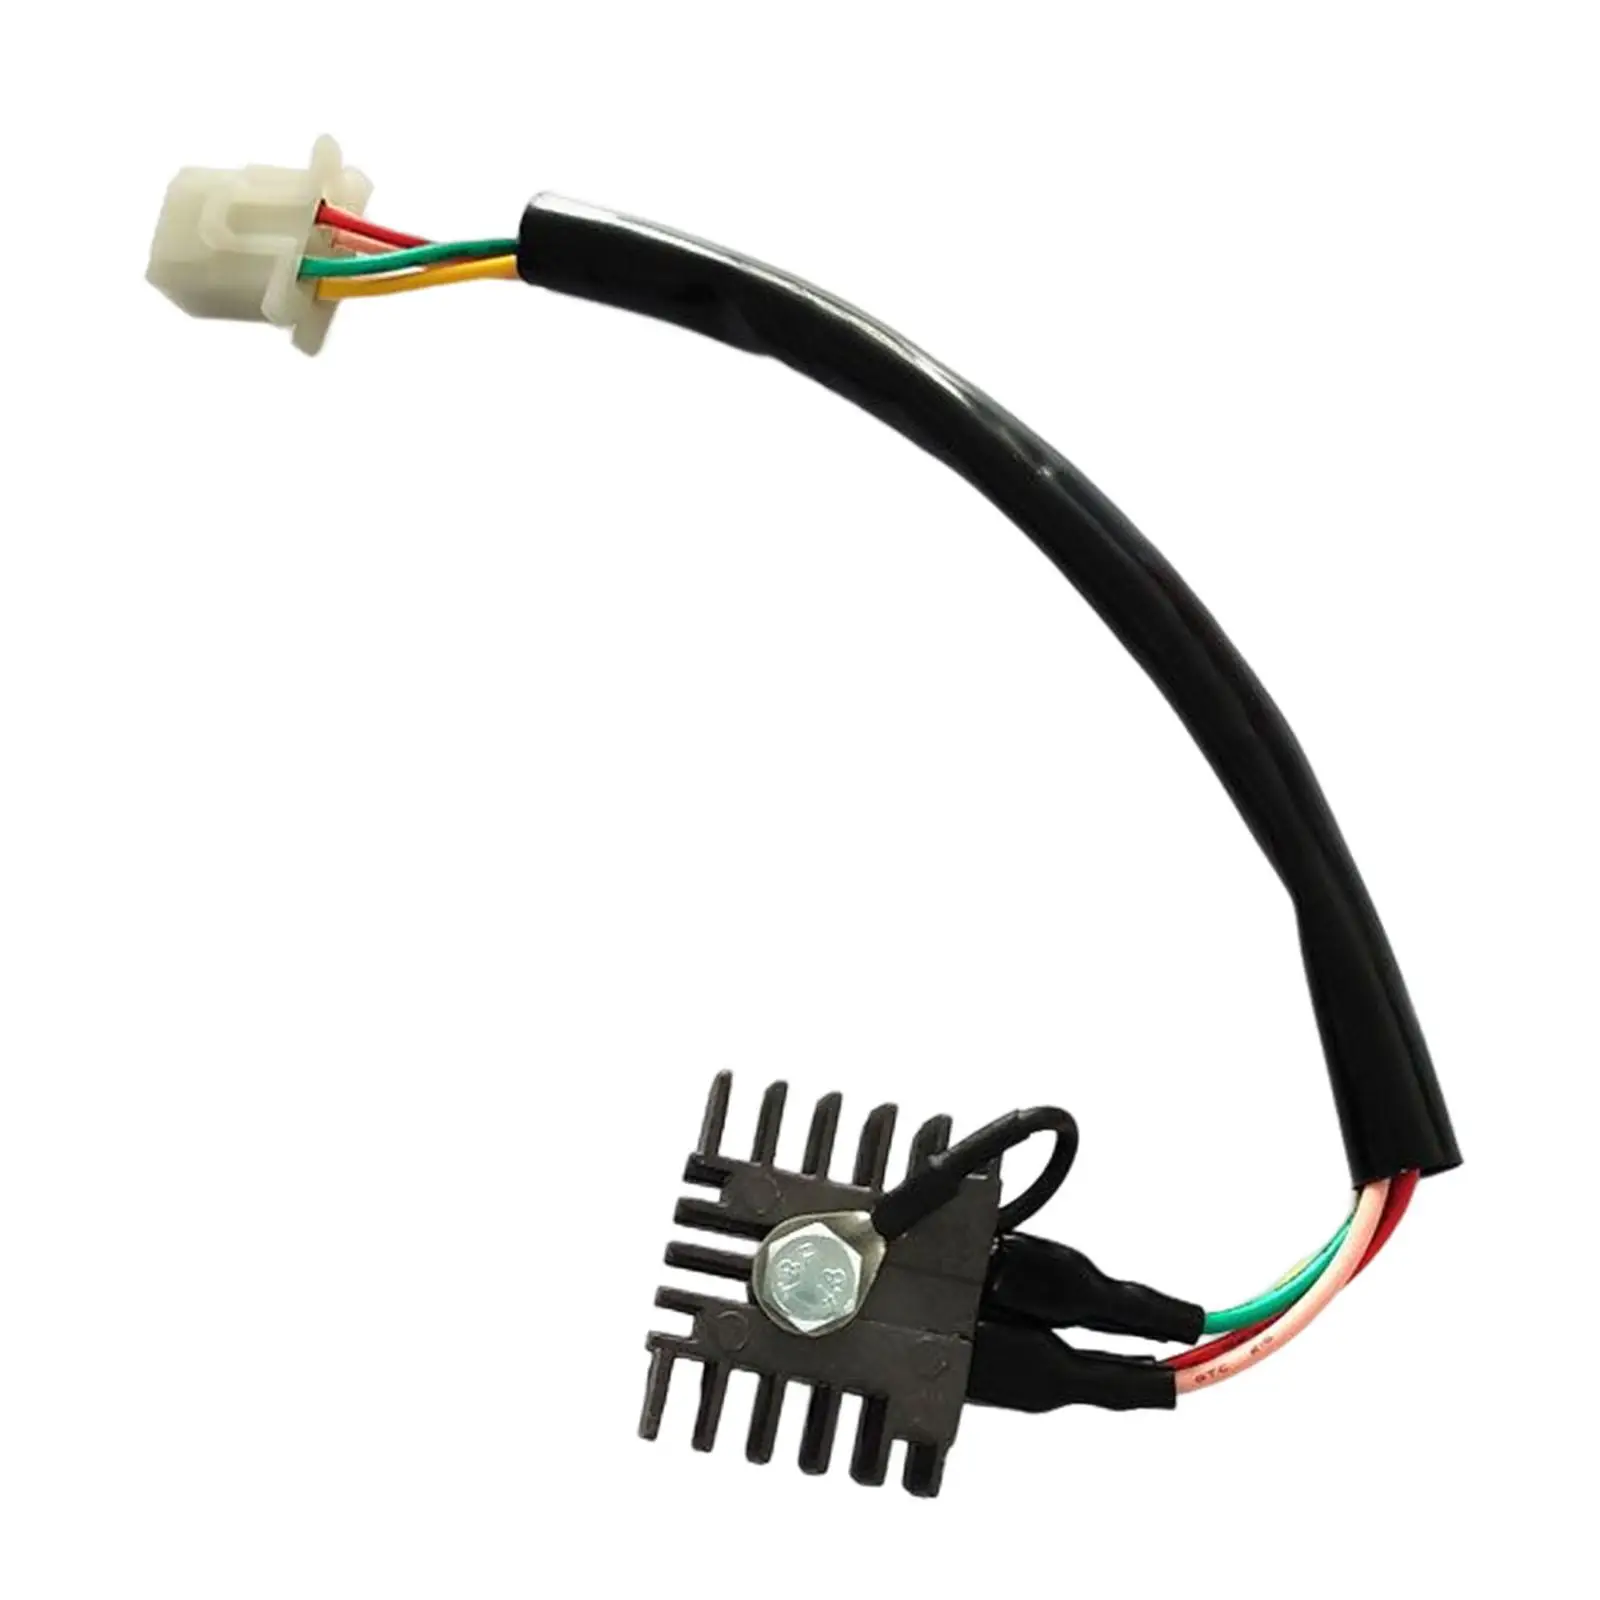 Voltage Regulator Replacement Fits for MT250 CB350 SL Motorbikes Supplies Motorcycle Parts